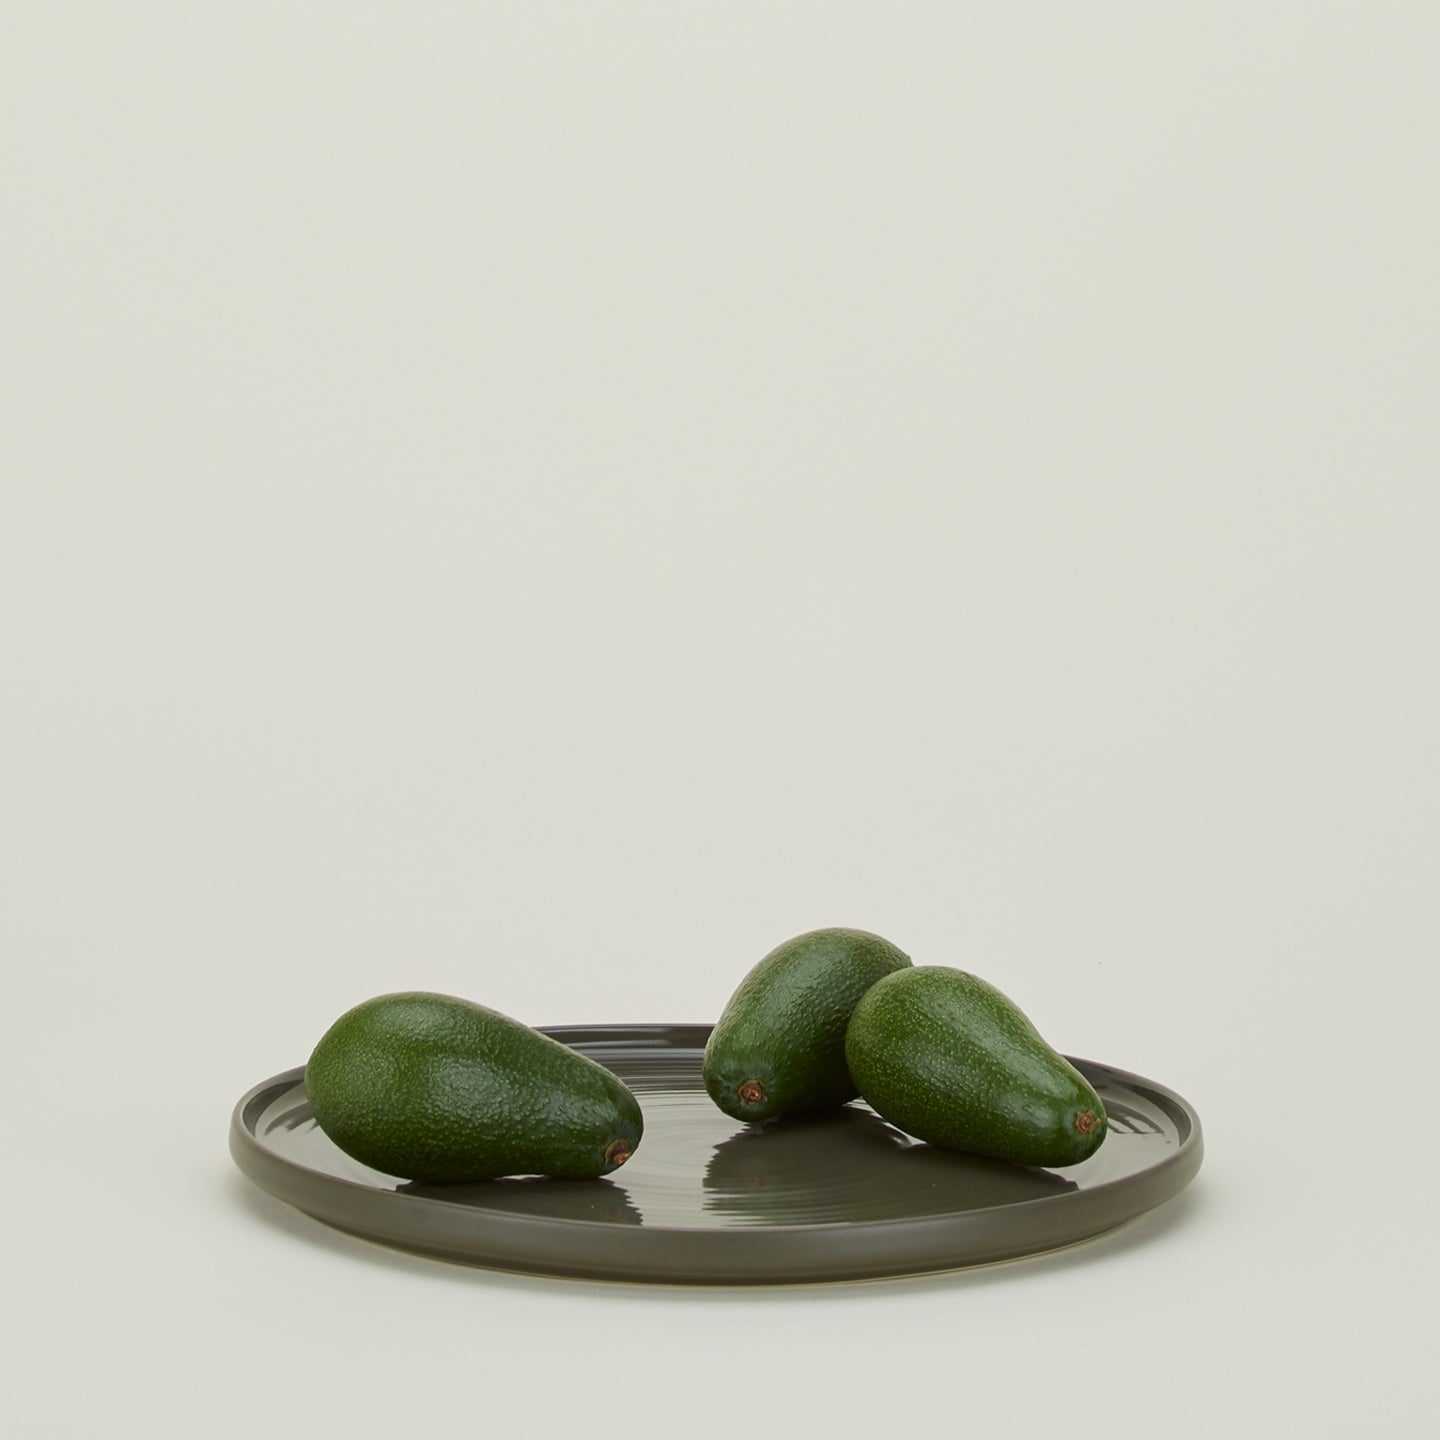 Essential Serving Platter in Olive with avocados.